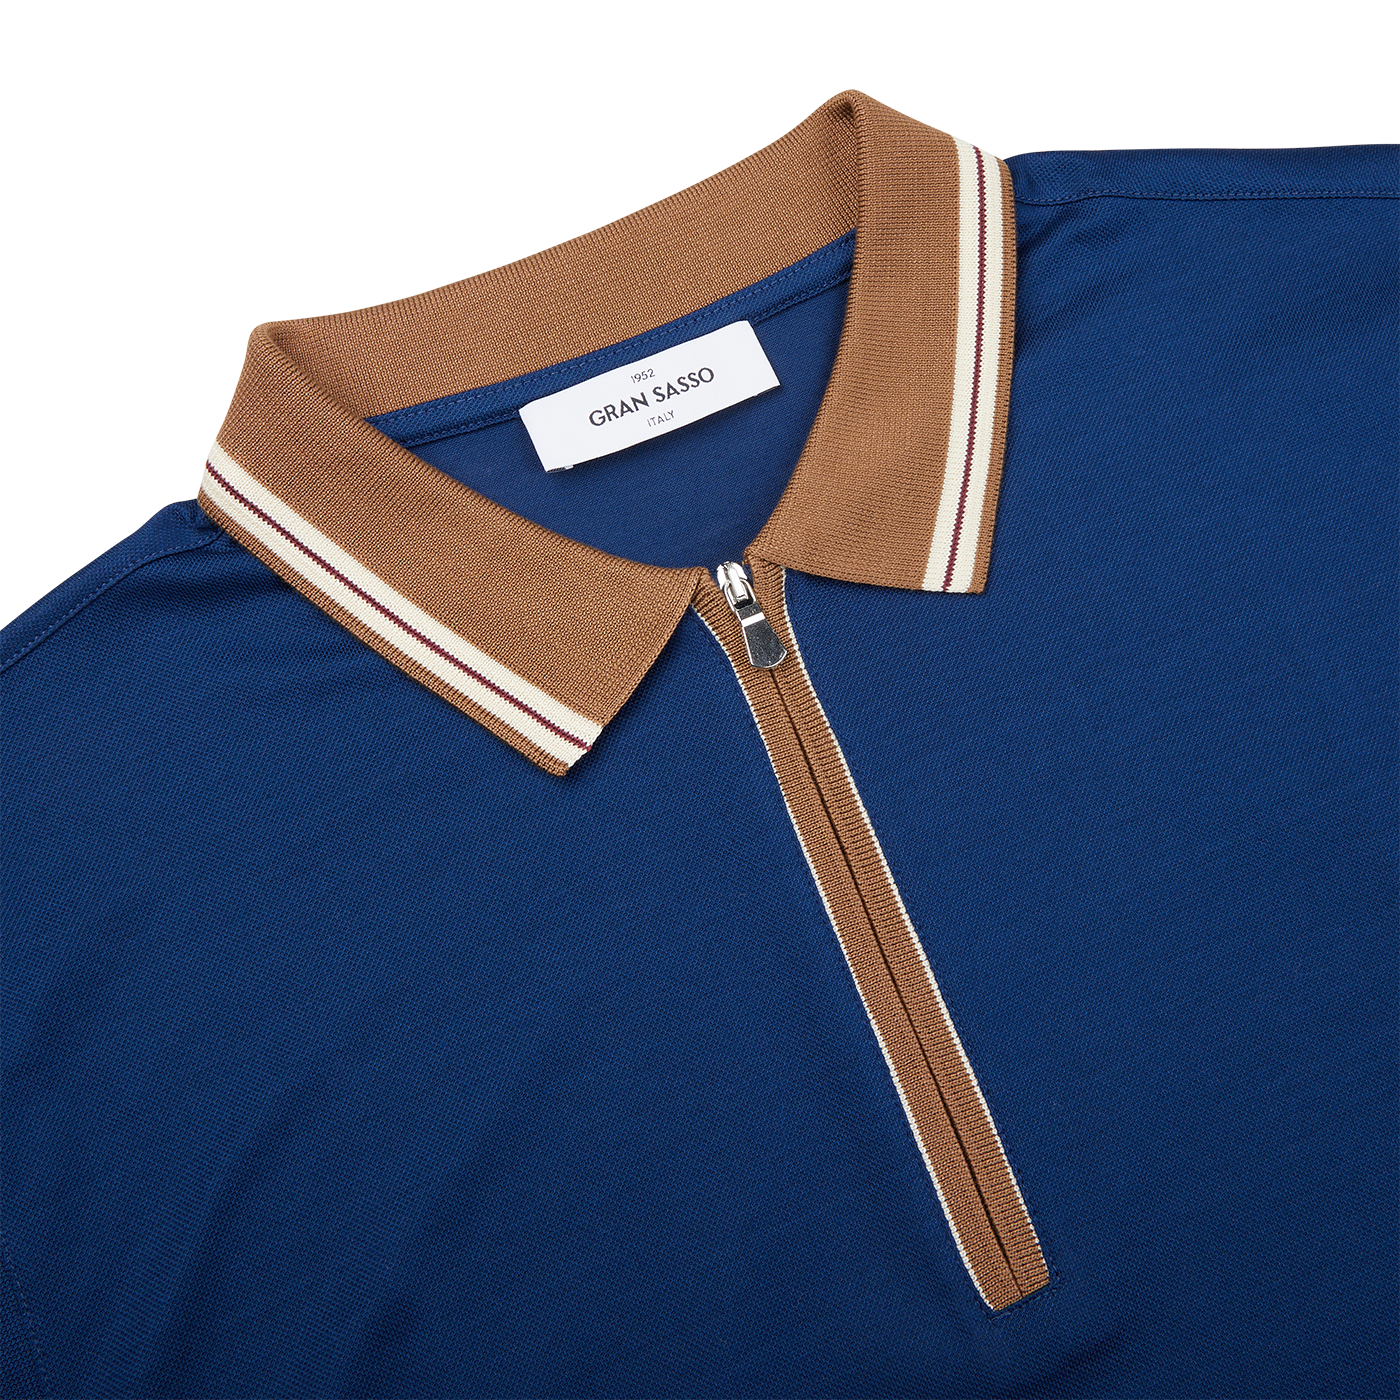 A high-quality Dark Blue Filo Scozia Zip polo shirt from Gran Sasso with a tan and brown collar.